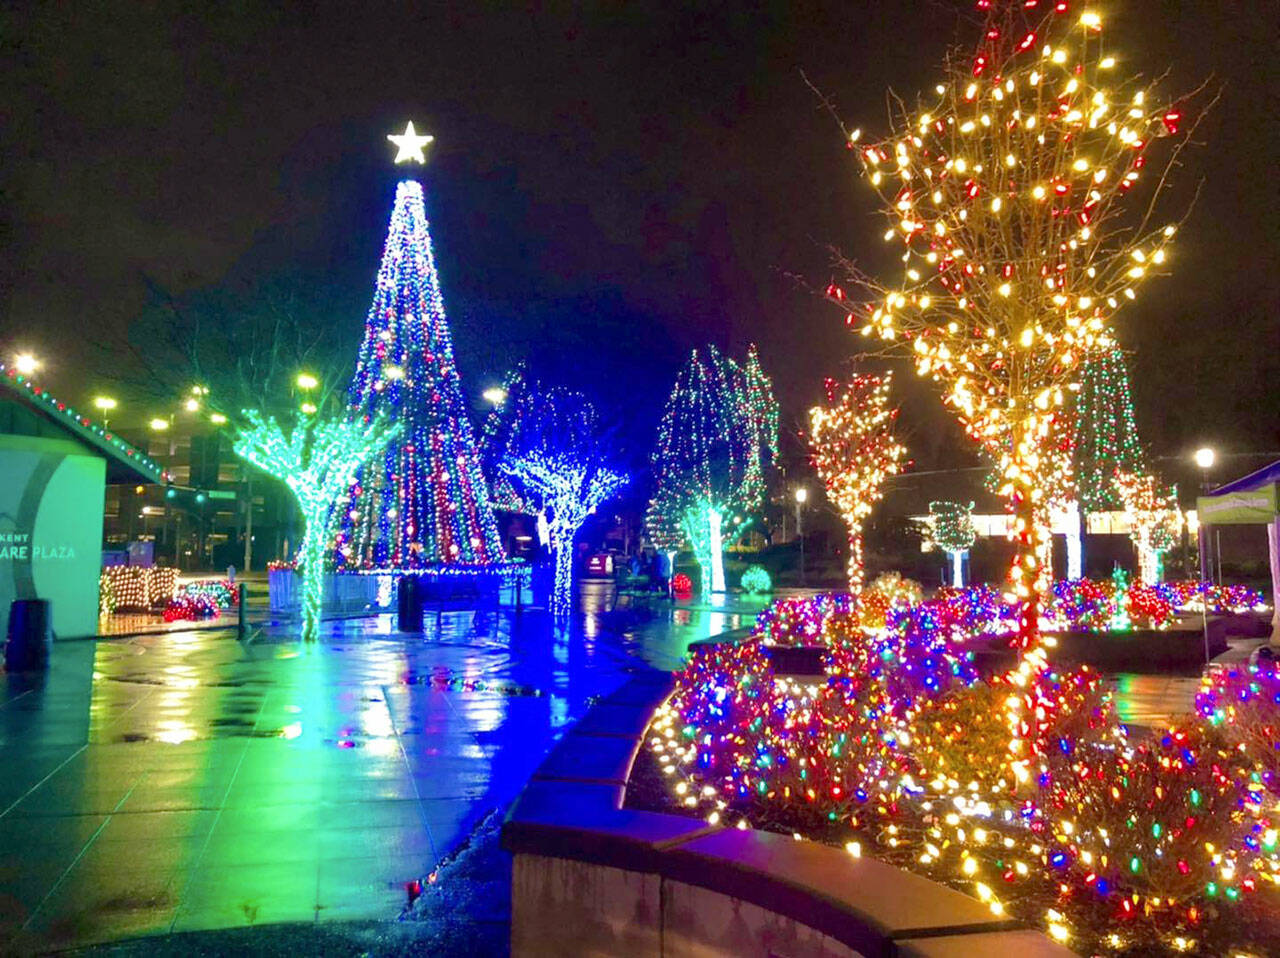 The holiday lights are on at Town Square Plaza in downtown Kent. COURTESY PHOTO, City of Kent